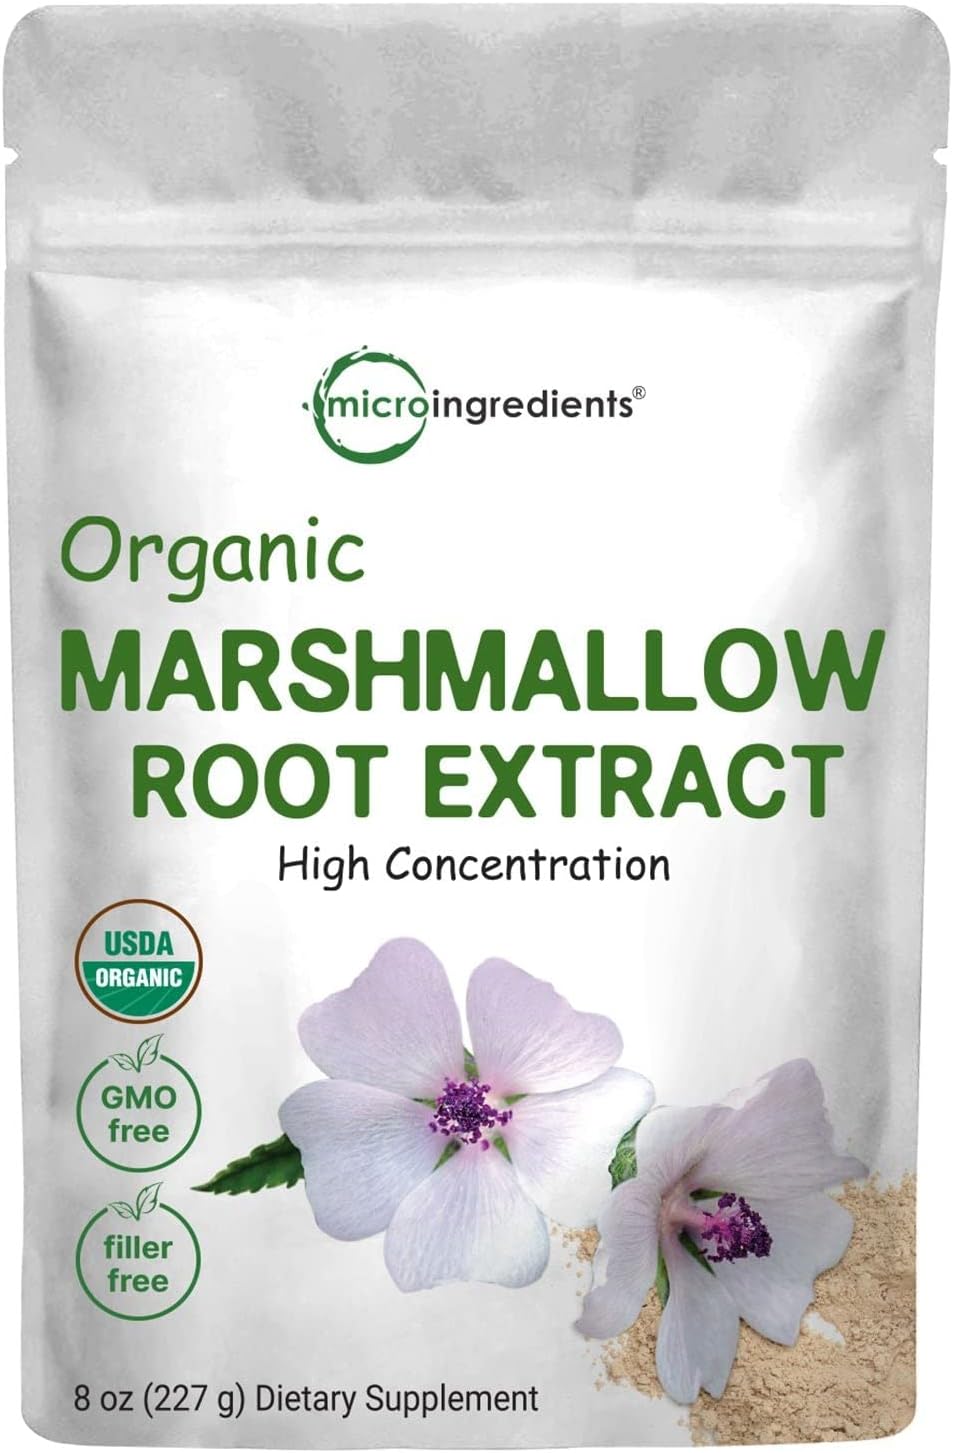 Micro Ingredients Organic Marshmallow Root Powder, 8 Ounce, Filler Free and Traditionally Used, Supports Digestive Gastrointestinal Health, Non-Irradiated and No GMOs, Vegan Friendly